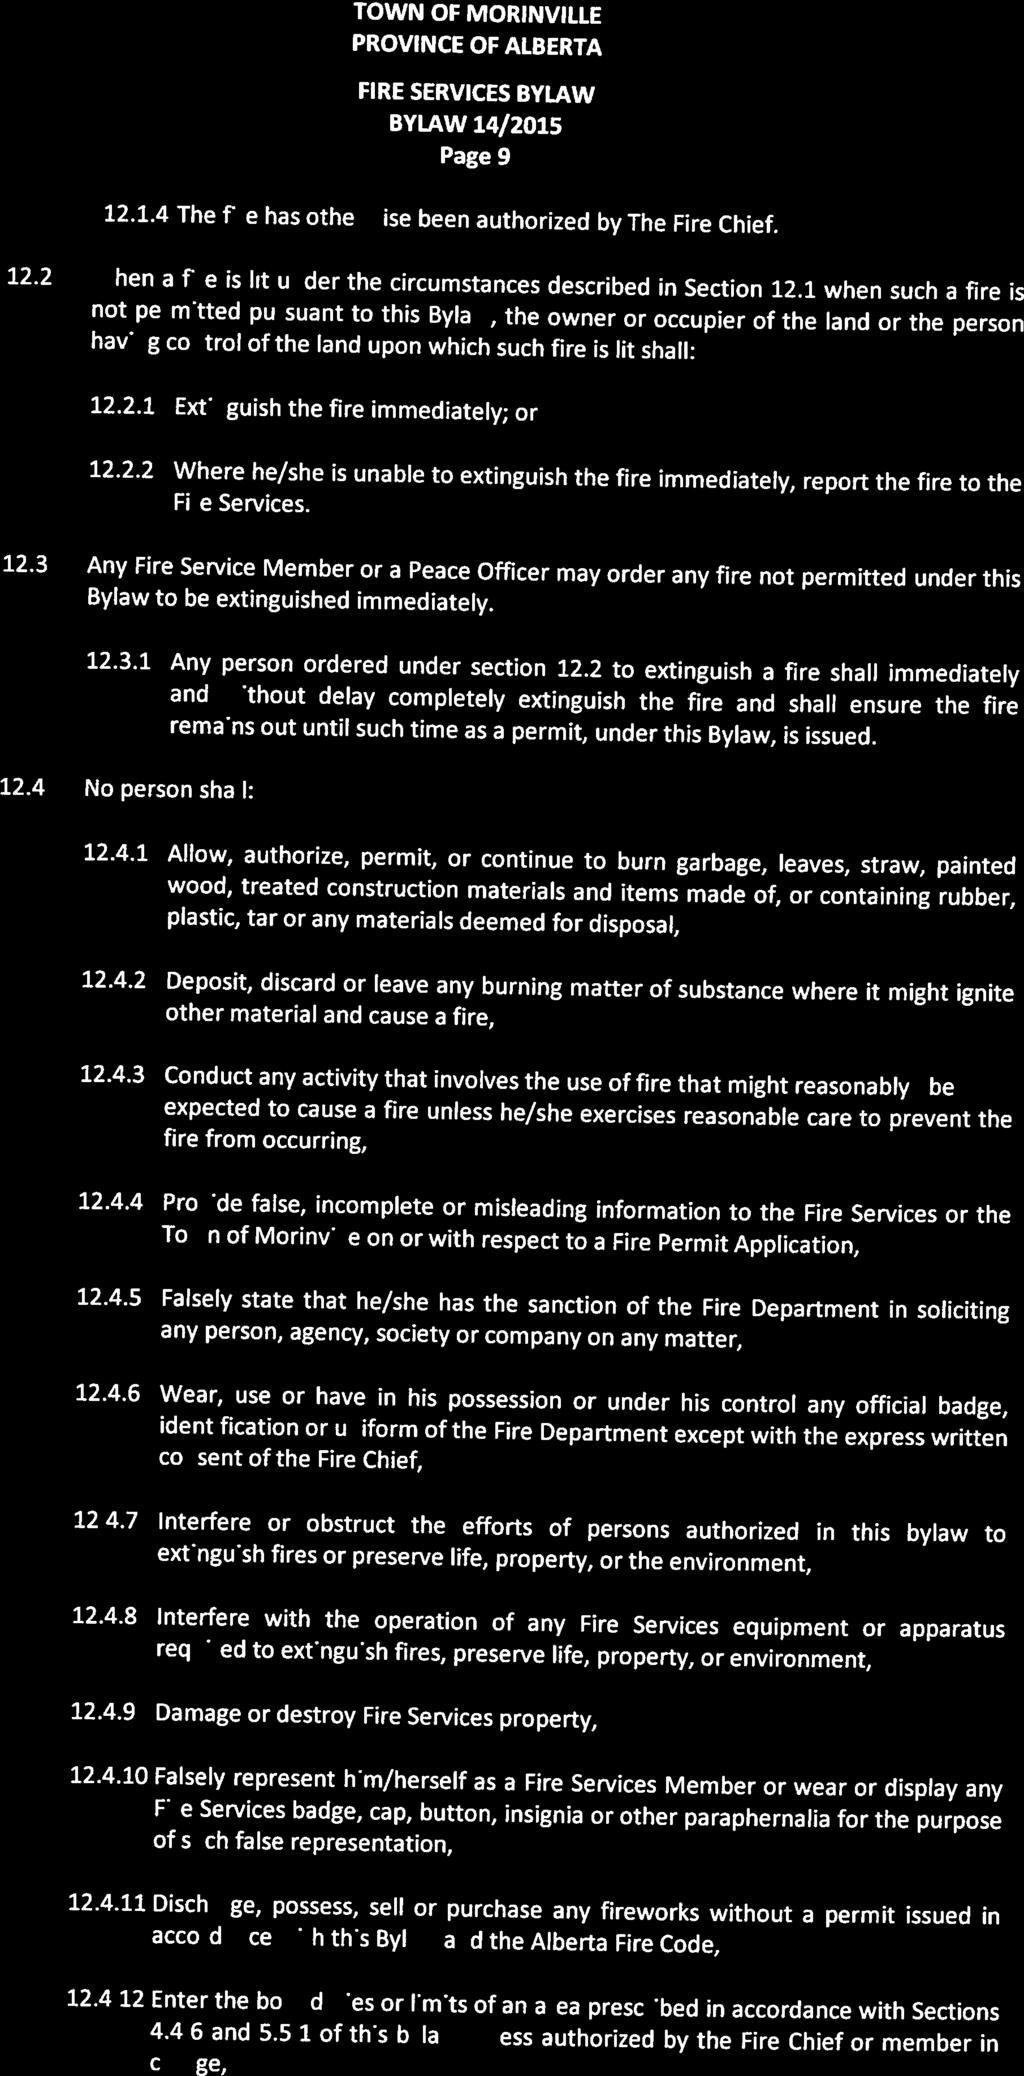 Page 9 12.1.4 The fire has otherwise been authorized by The Fire Chief. 12.2 When a fire is lit under the circumstances described in Section 12.